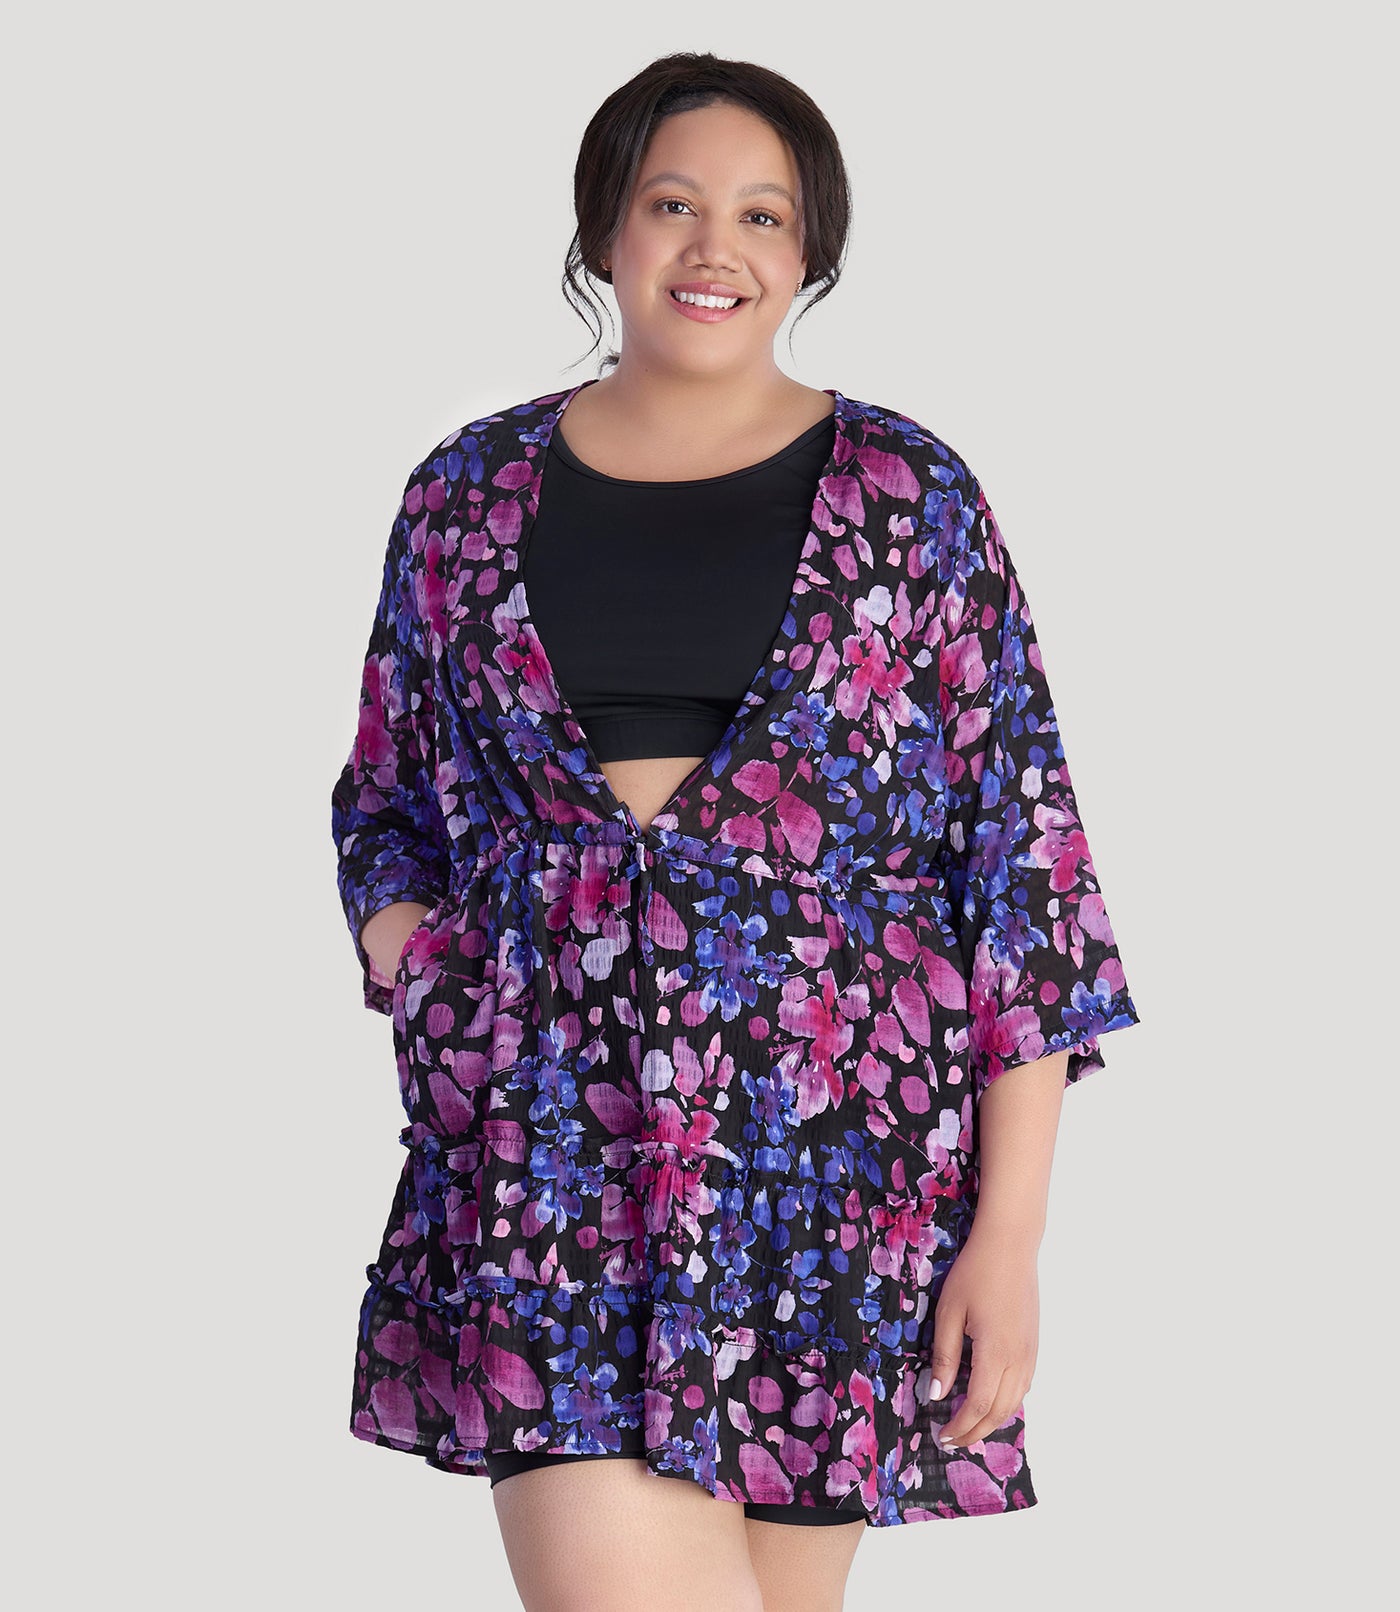 Plus size model, facing front, wearing JunoActive's BellaStyle Tie Front Tiered Cover-Up in floral elegance print.